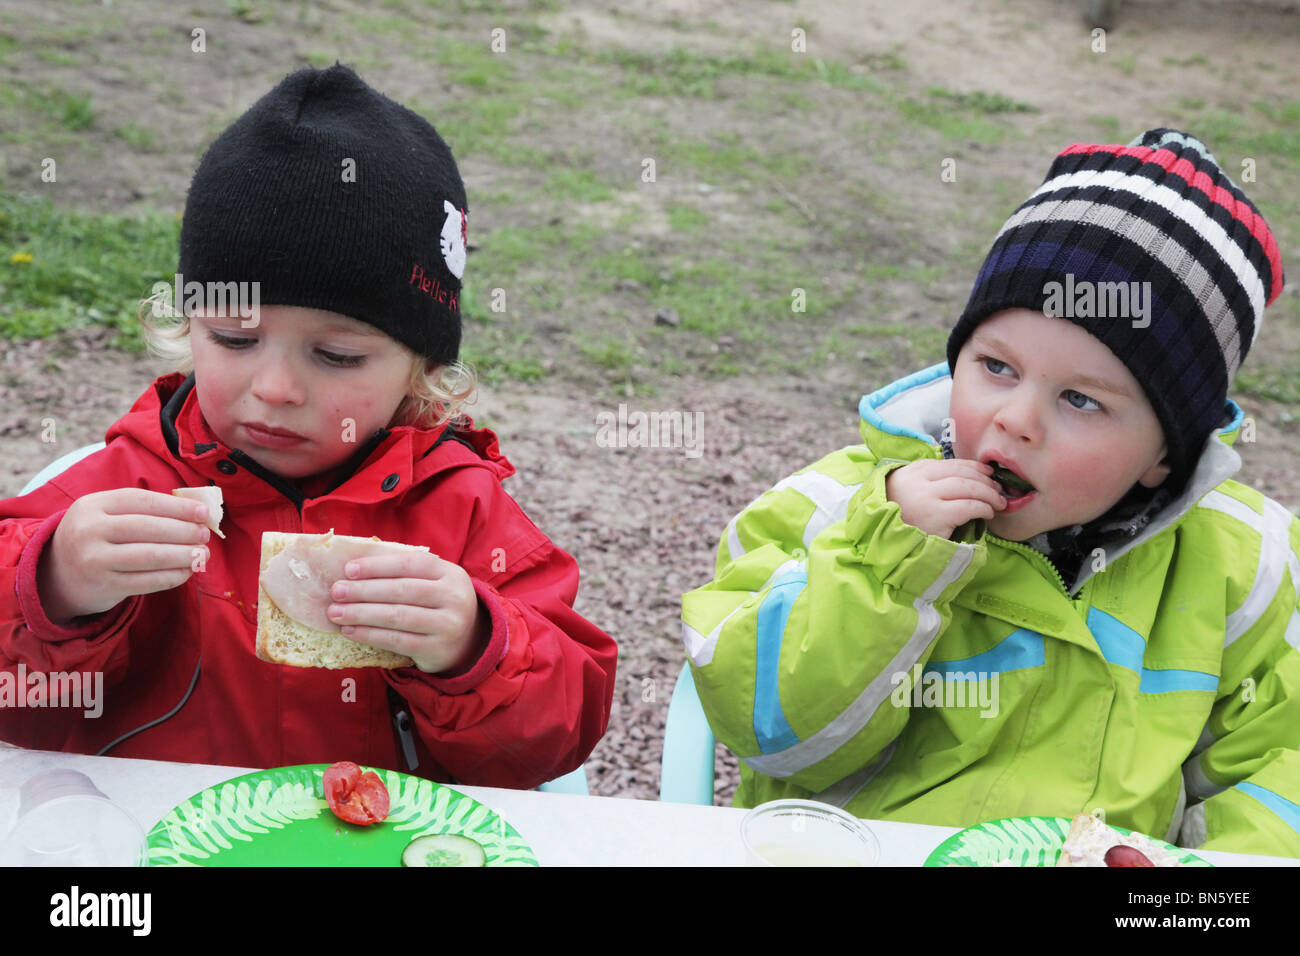 Toddlers boy girl siblings sitting at a party table waiting eating sandwiches MODEL RELEASED Stock Photo